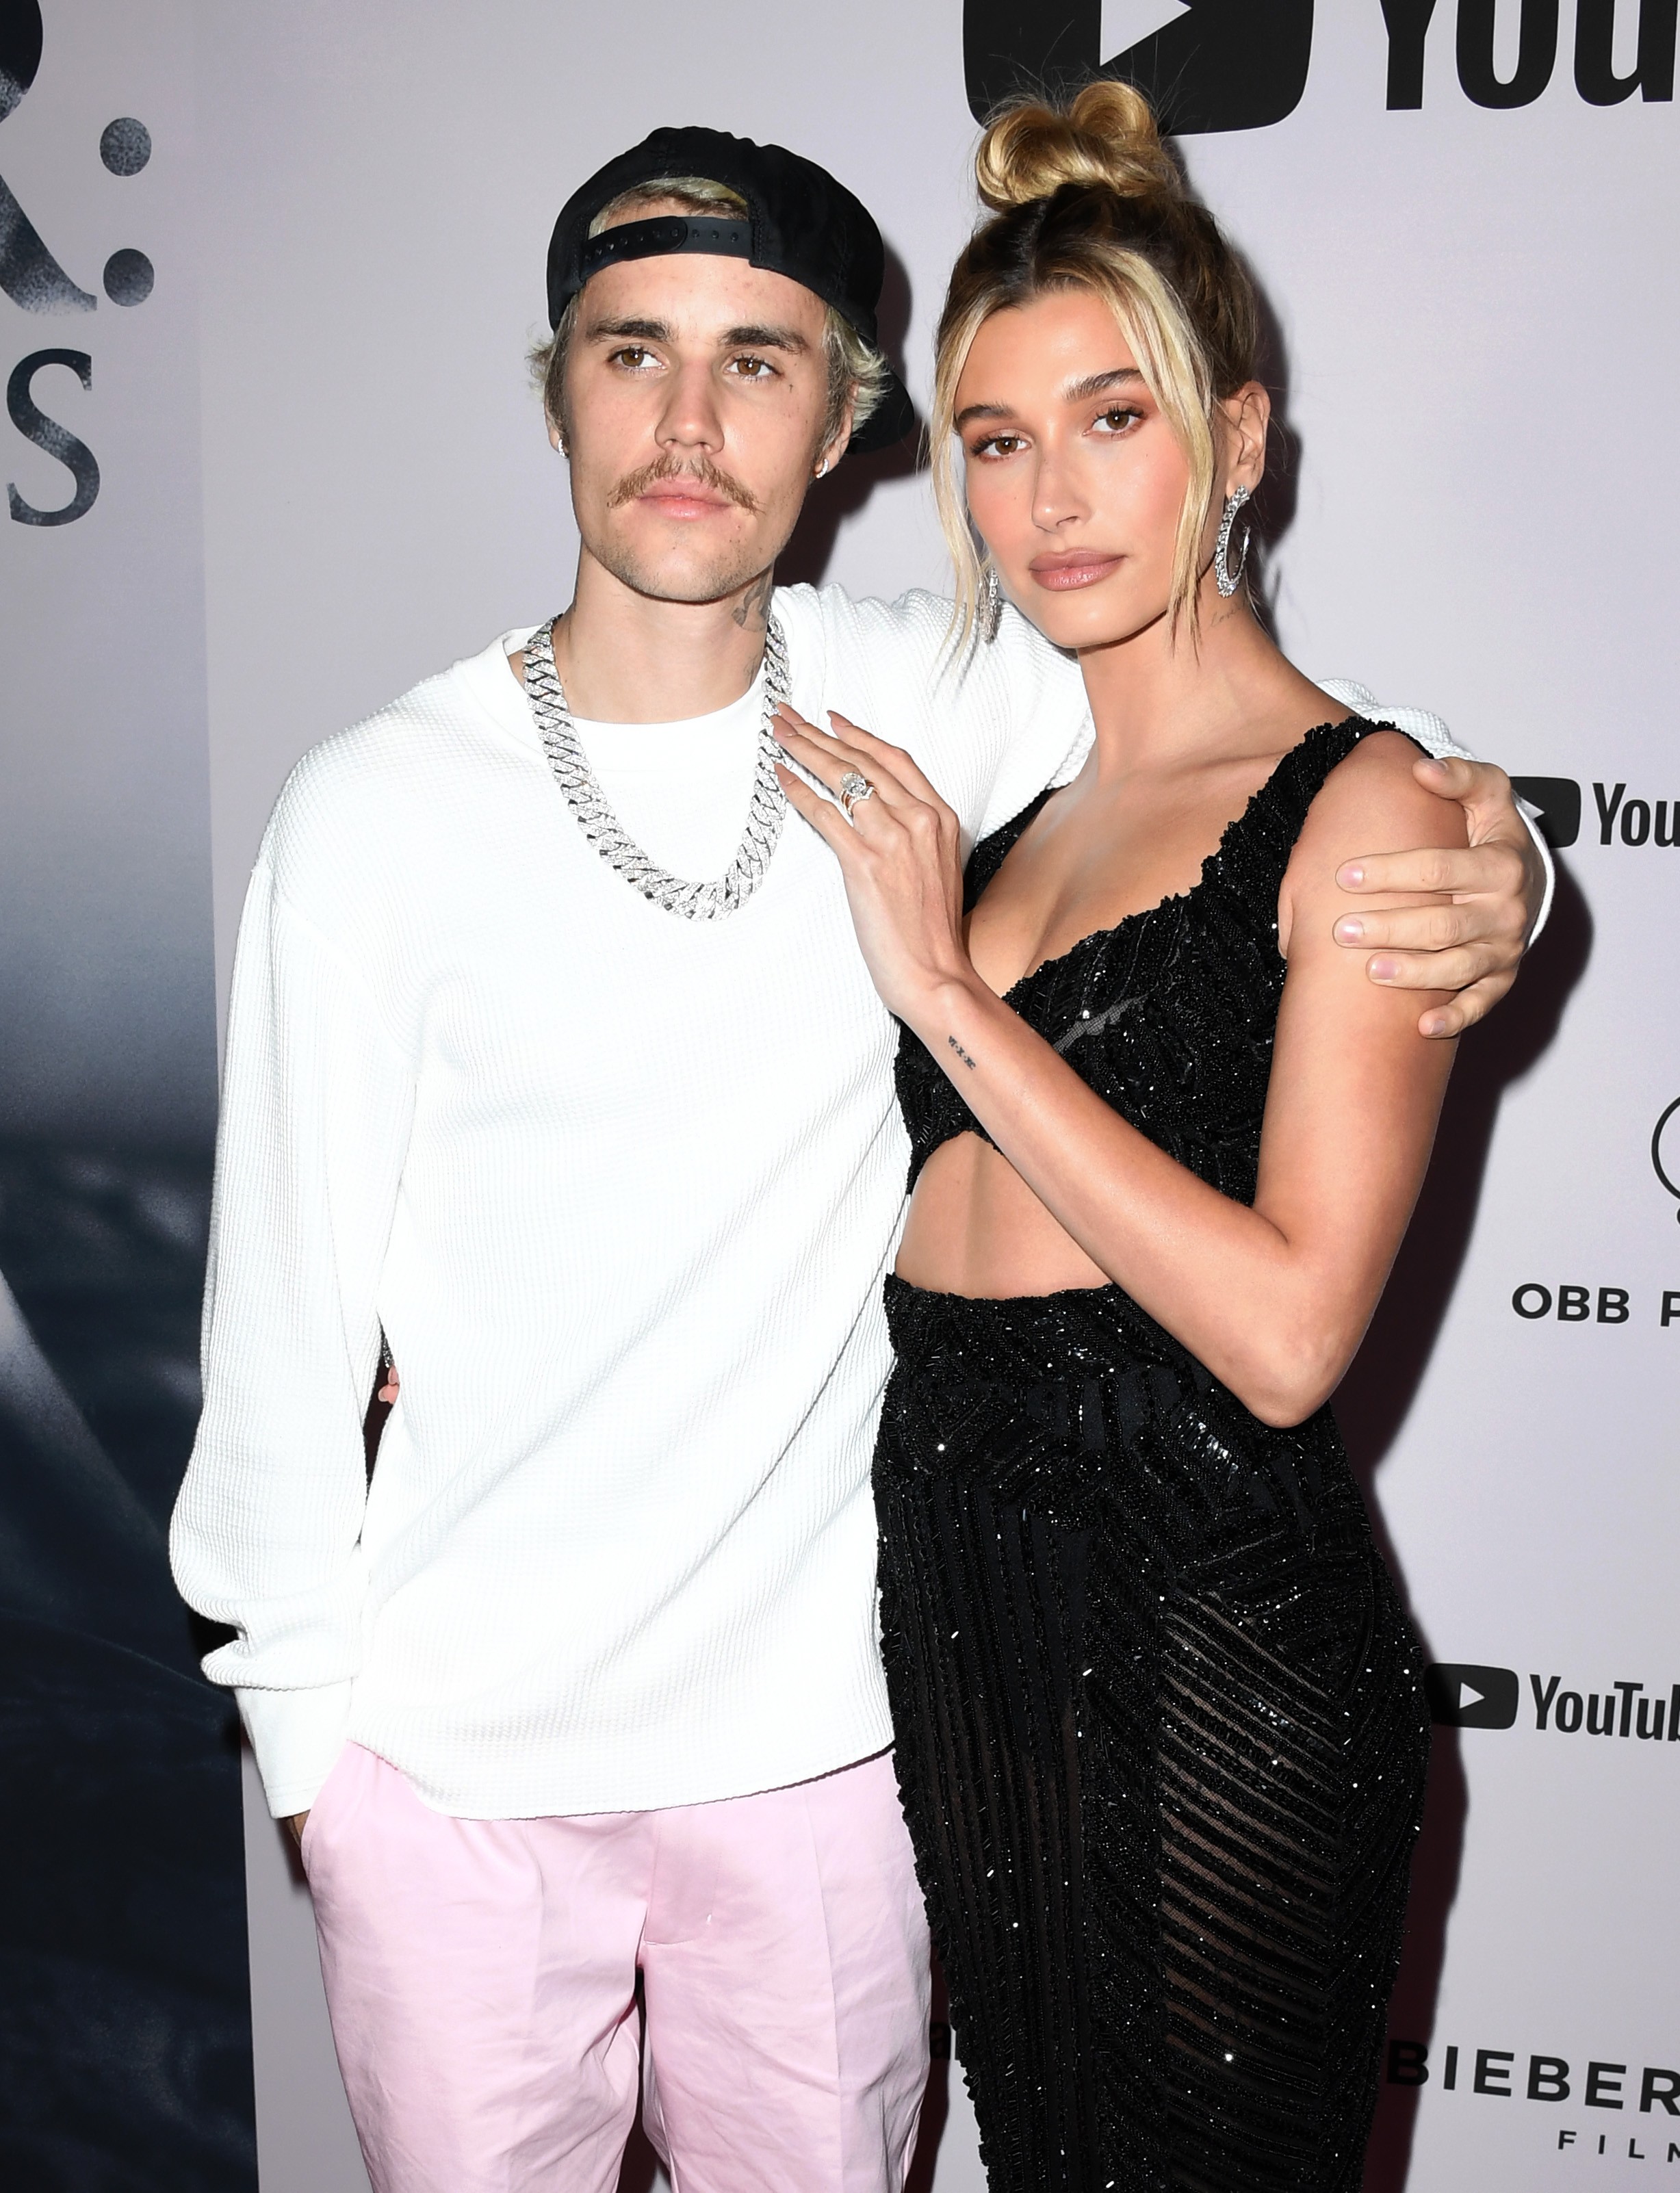 LOS ANGELES, CALIFORNIA - JANUARY 27:  Justin Bieber and Hailey Bieber attend the premiere of YouTube Originals' "Justin Bieber: Seasons" at Regency Bruin Theatre on January 27, 2020 in Los Angeles, California. (Photo by Jon Kopaloff/Getty Images) (Foto: Getty Images)